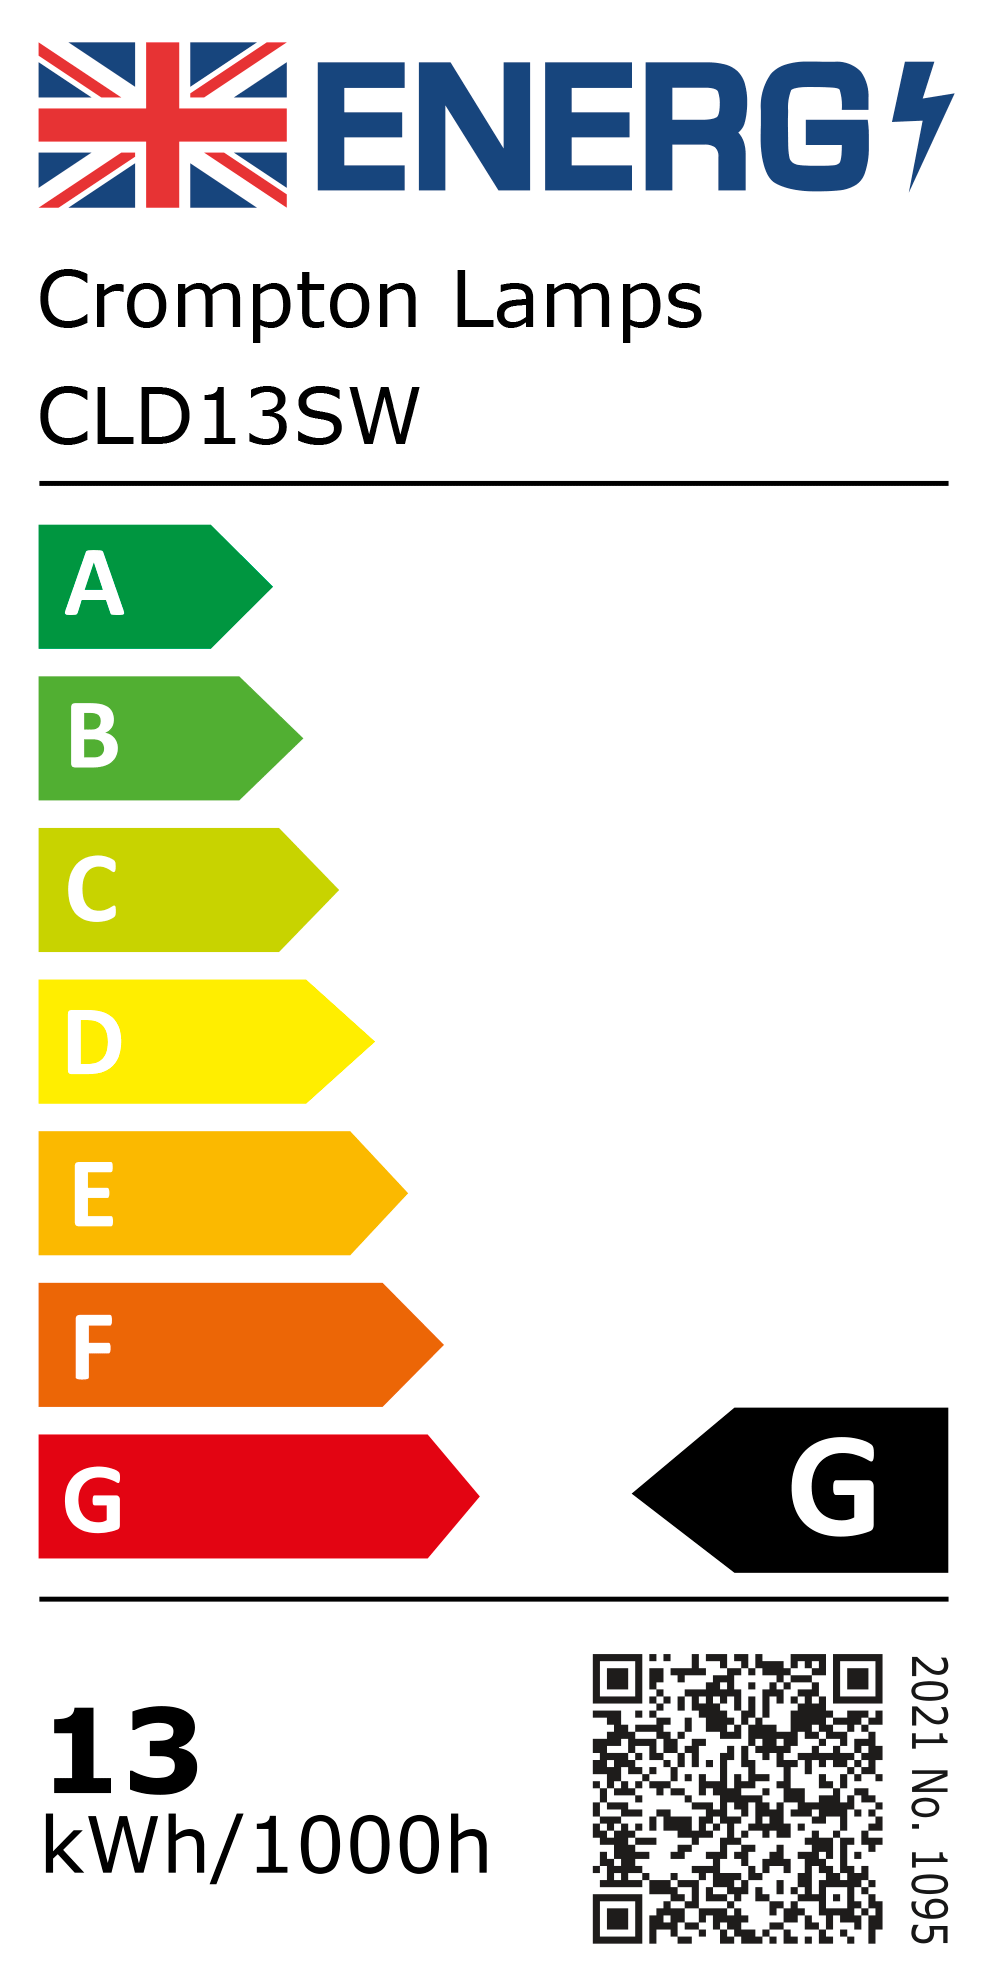 New 2021 Energy Rating Label: Stock Code CLD13SW